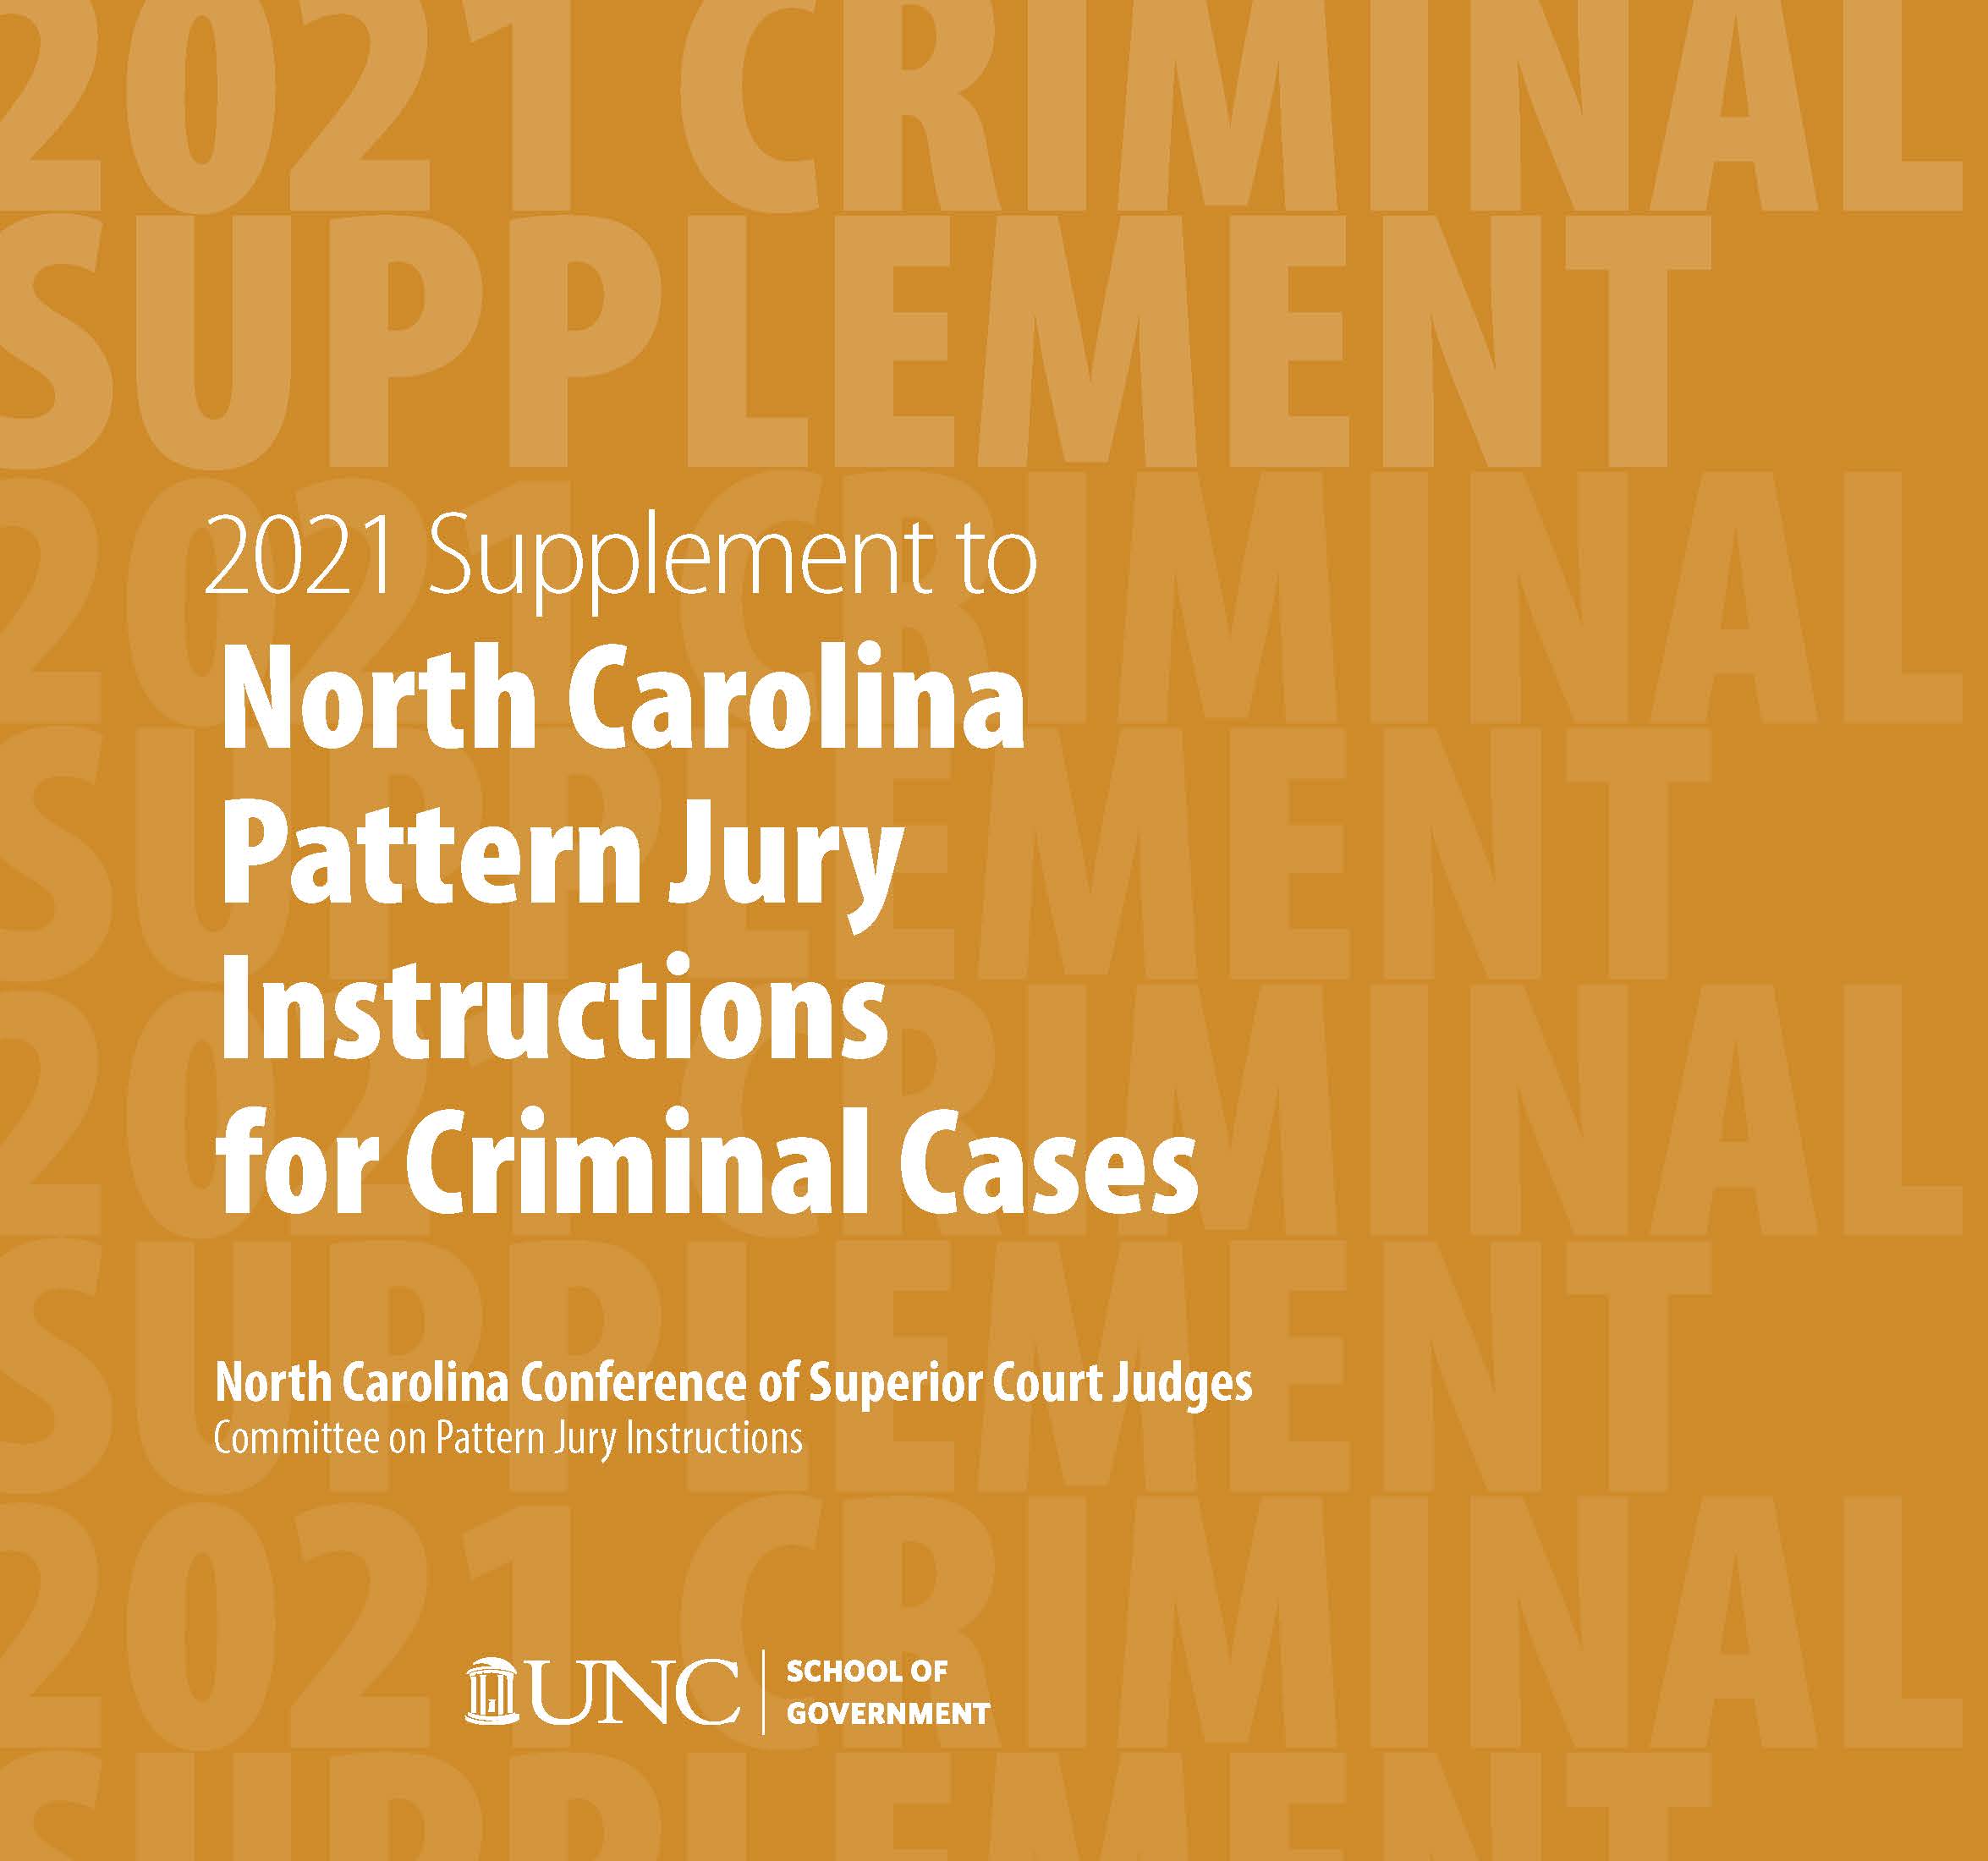 Cover image for June 2021 Supplement to North Carolina Pattern Jury Instructions for Criminal Cases